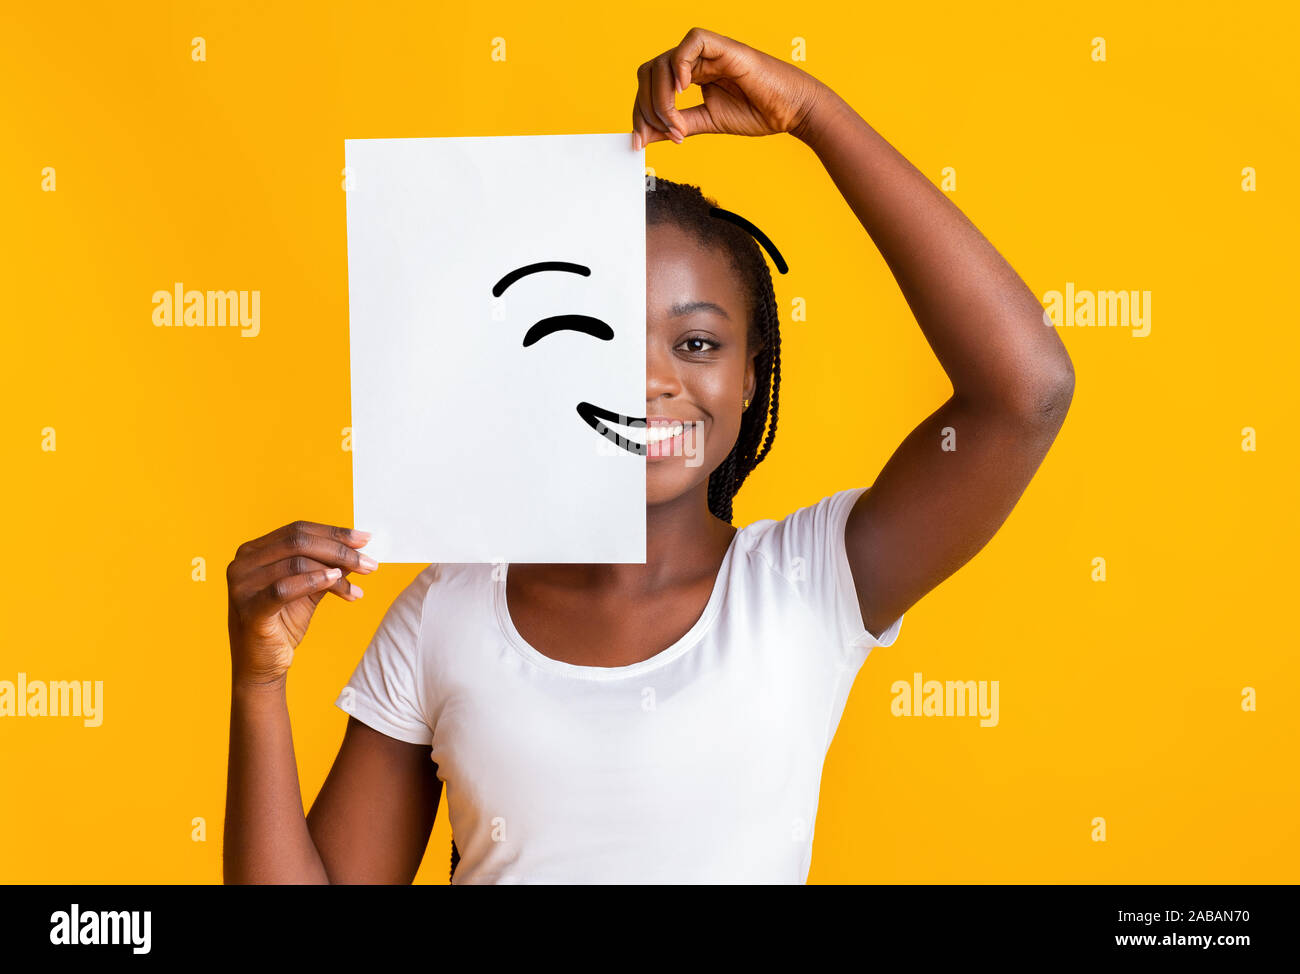 Black woman covering half face with smiley picture Stock Photo